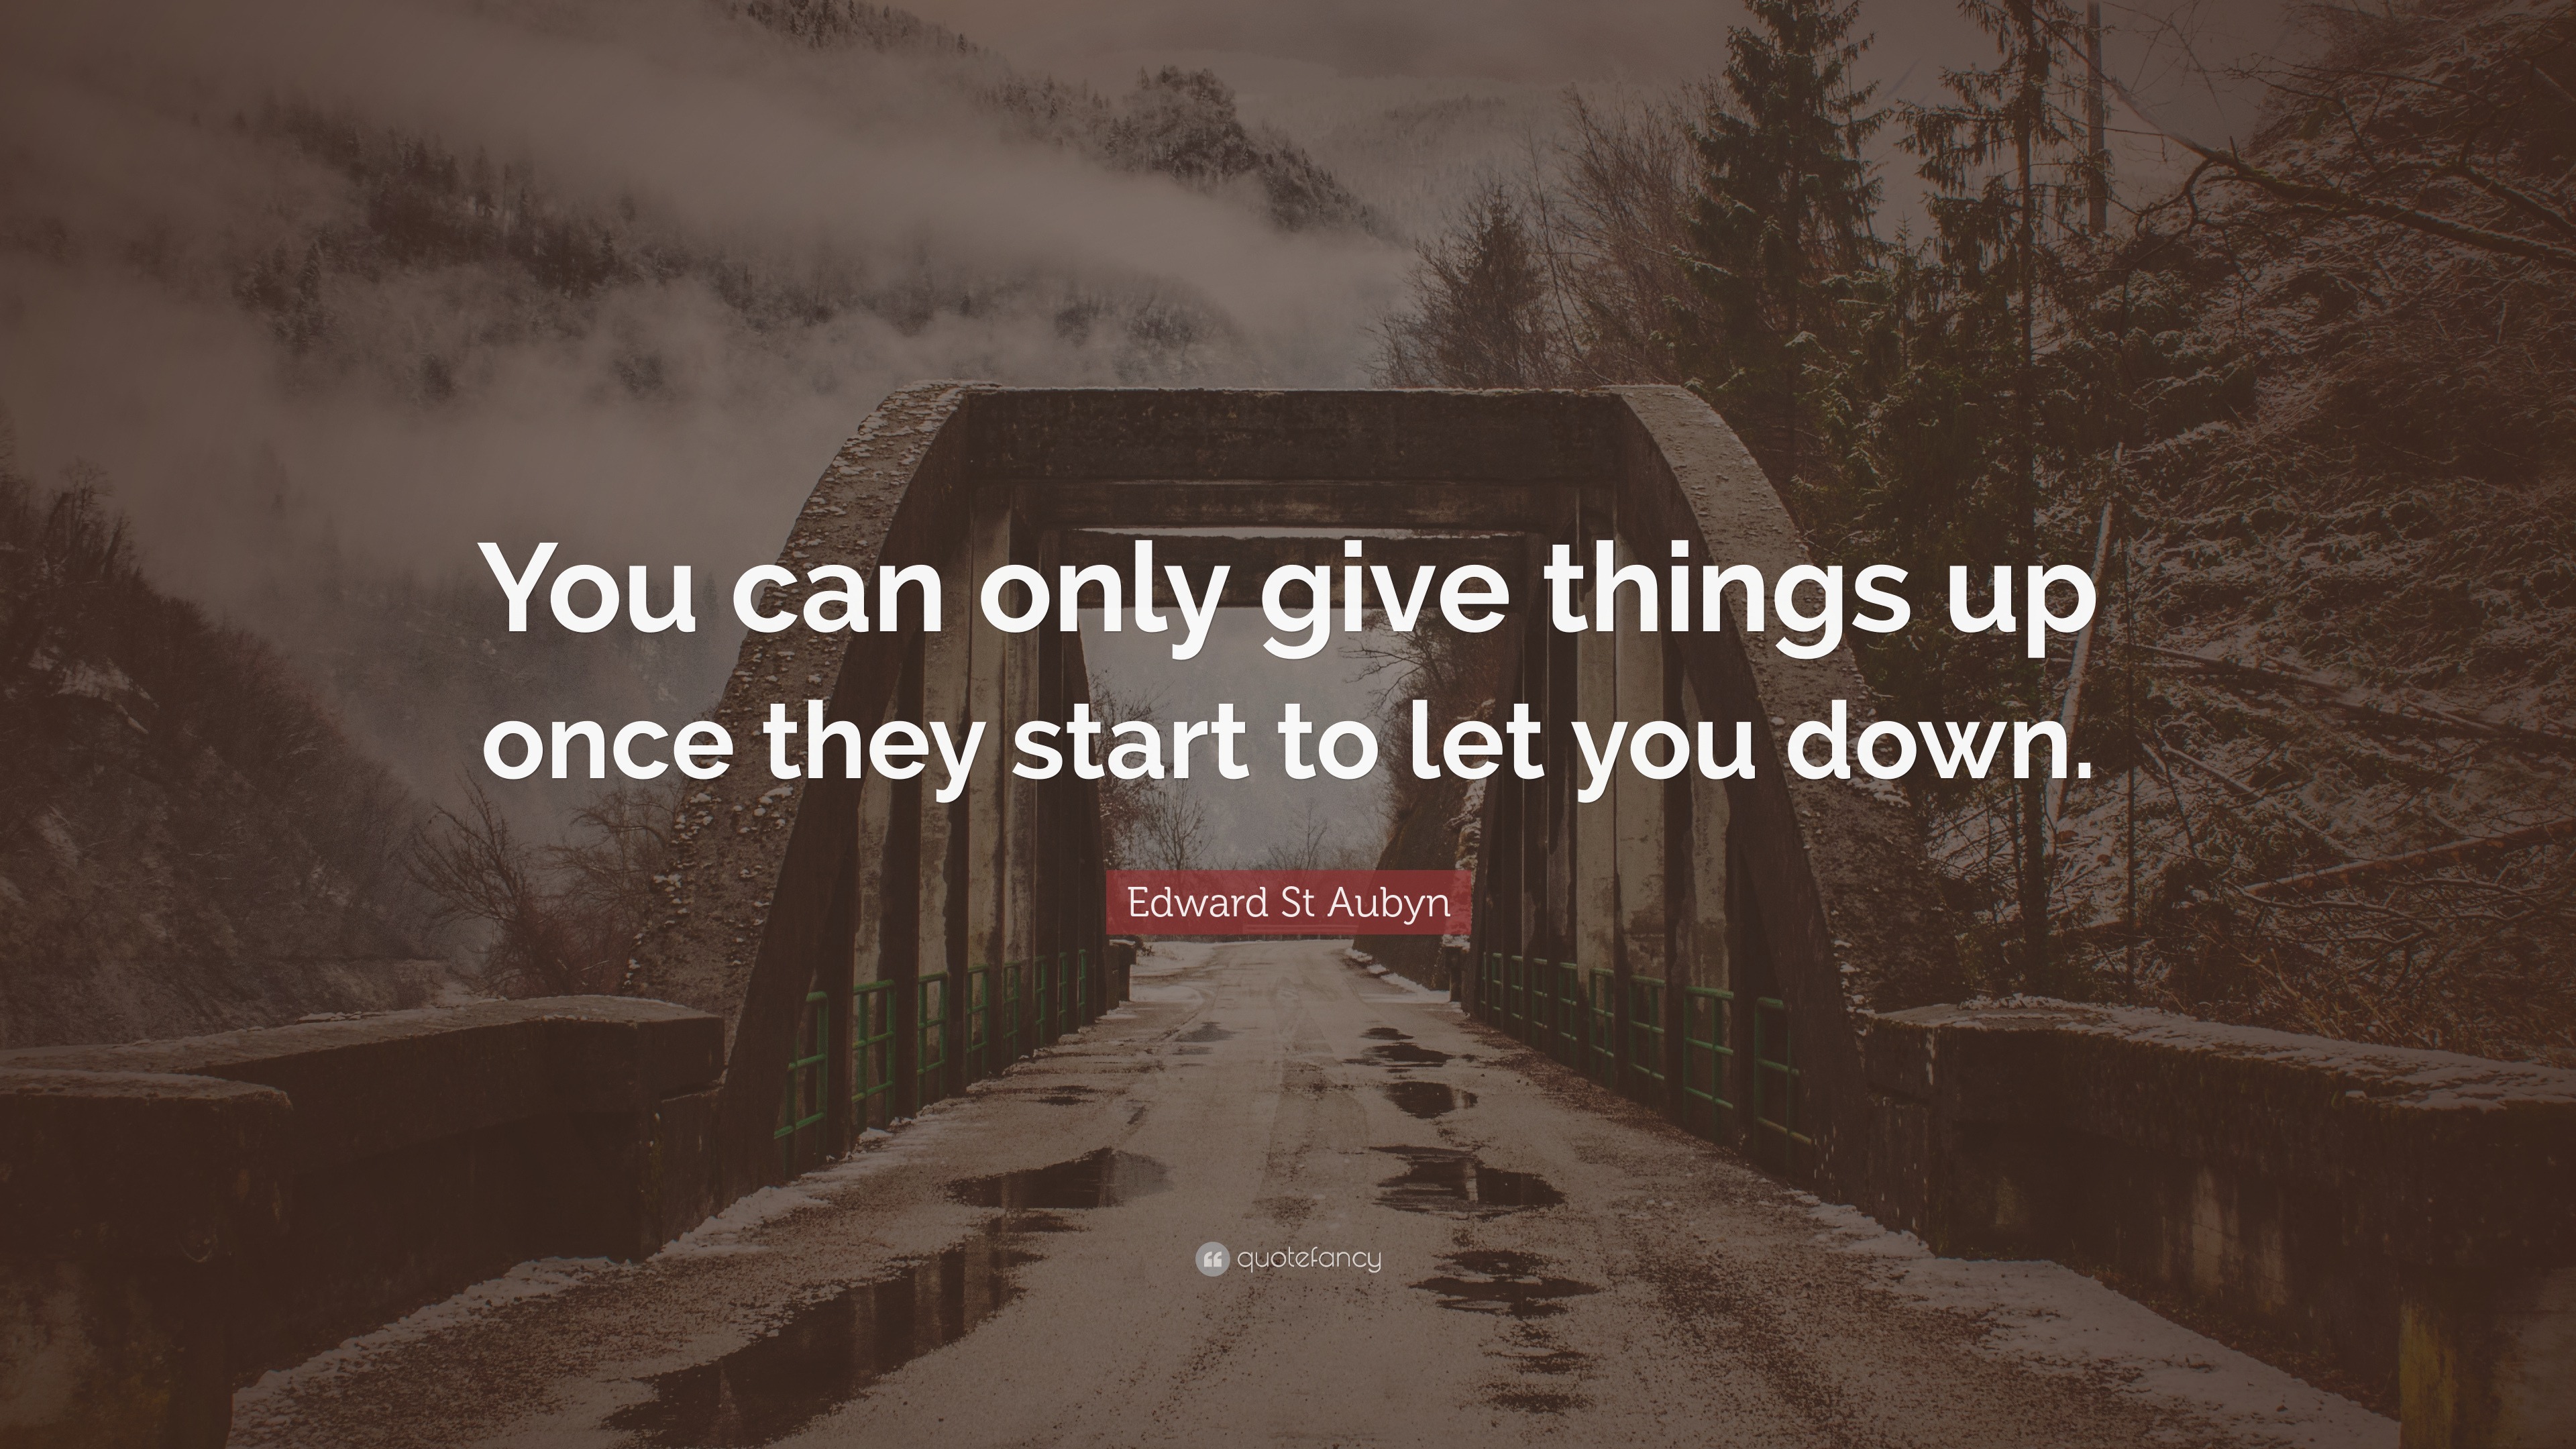 Escribir insuficiente reputación Edward St Aubyn Quote: “You can only give things up once they start to let  you